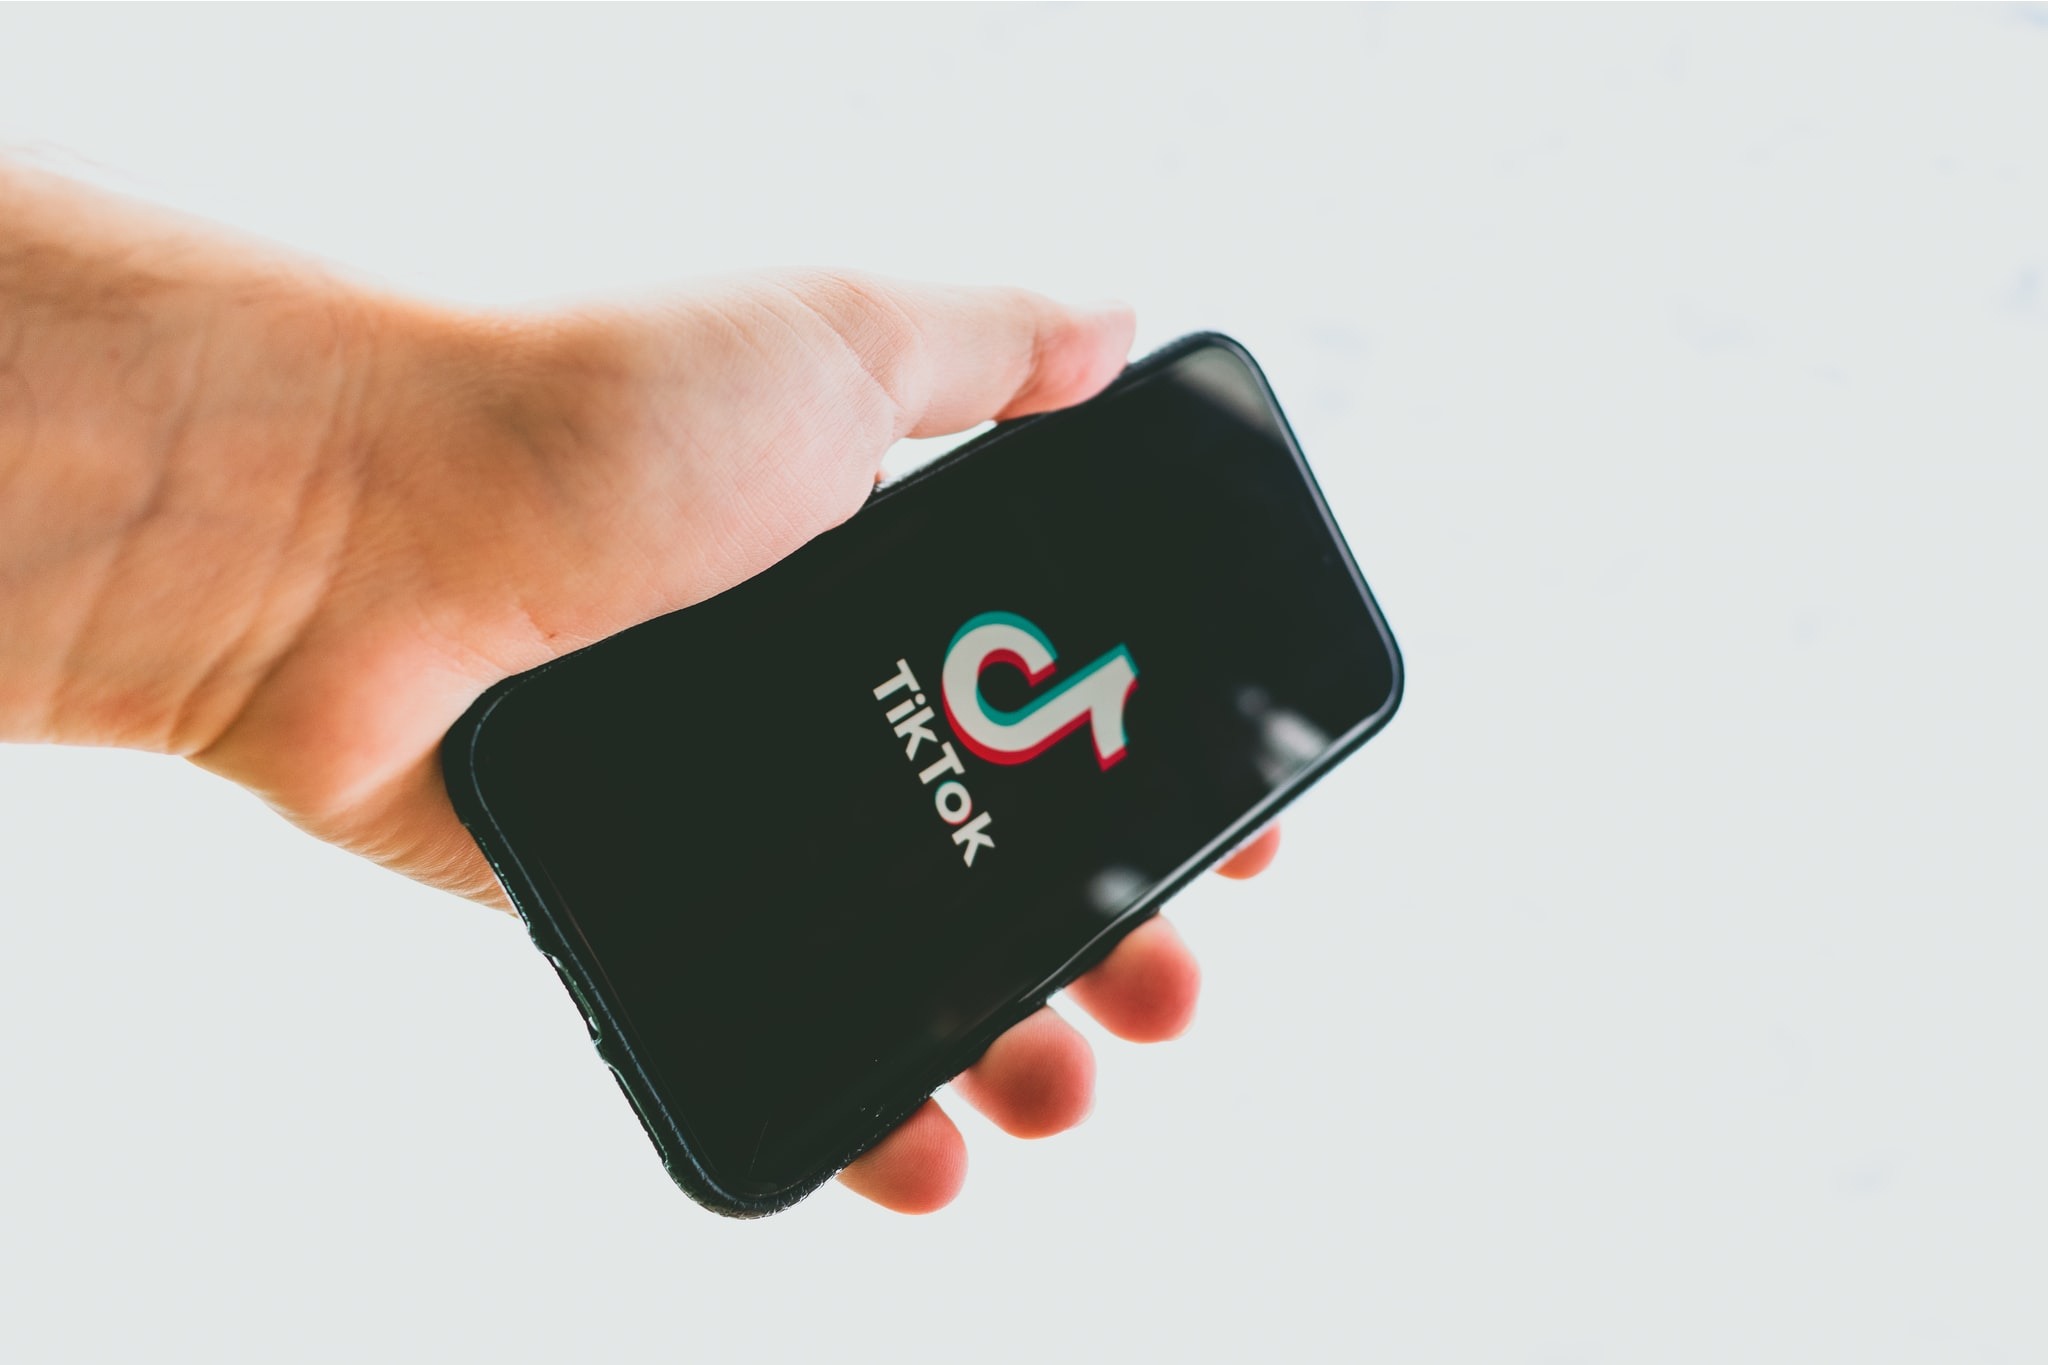 The President Just Approved A Deal For TikTok. Here’s What We Know.